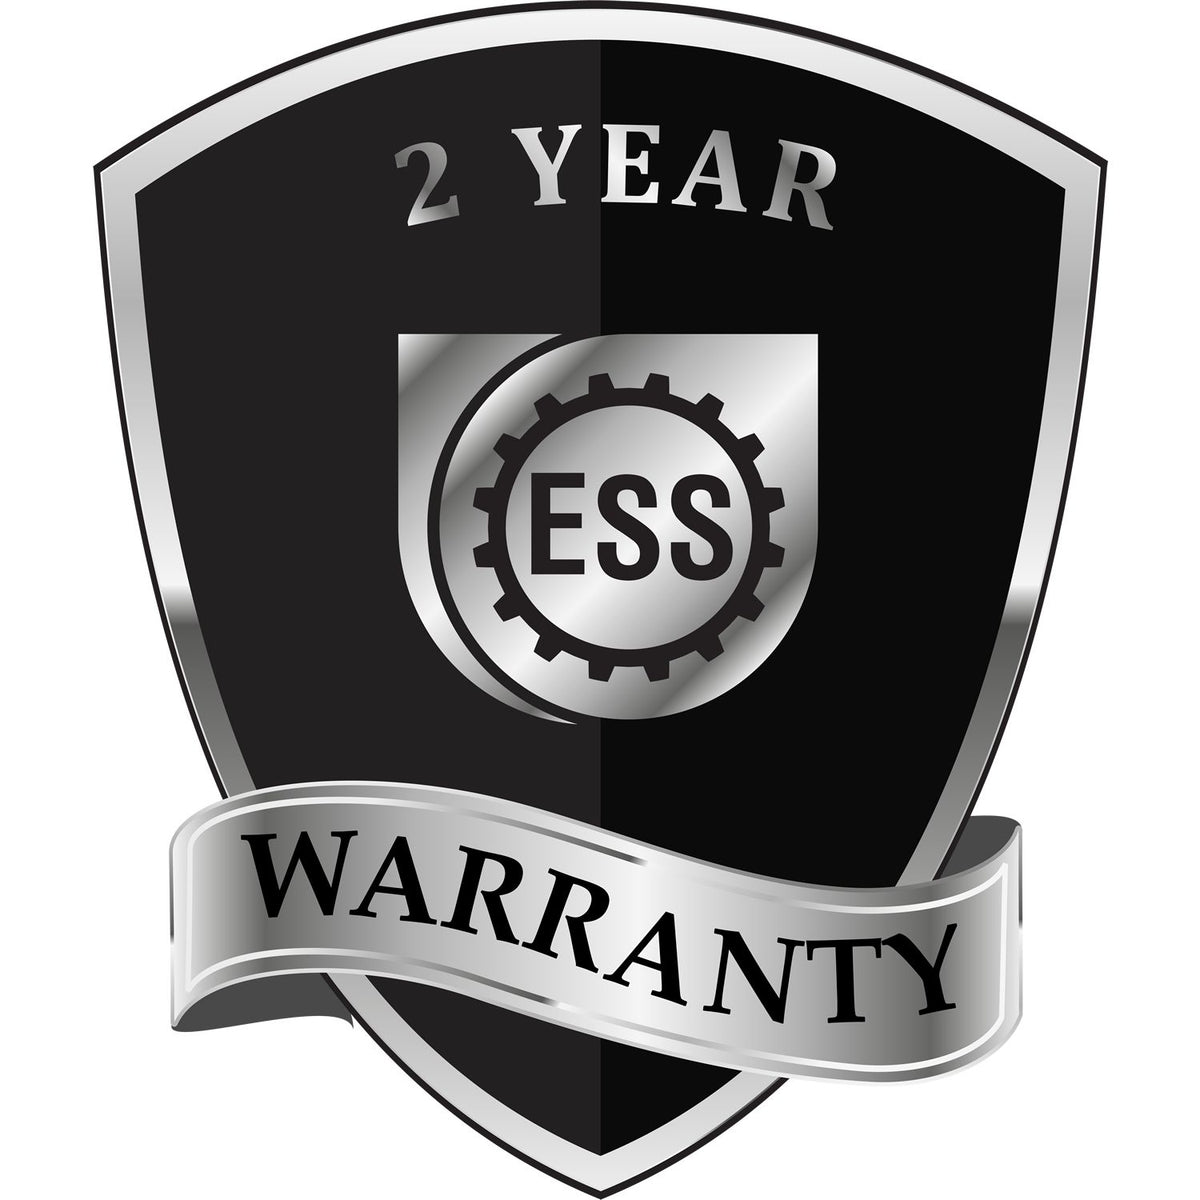 A black and silver badge or emblem showing warranty information for the Hybrid Pennsylvania Architect Seal